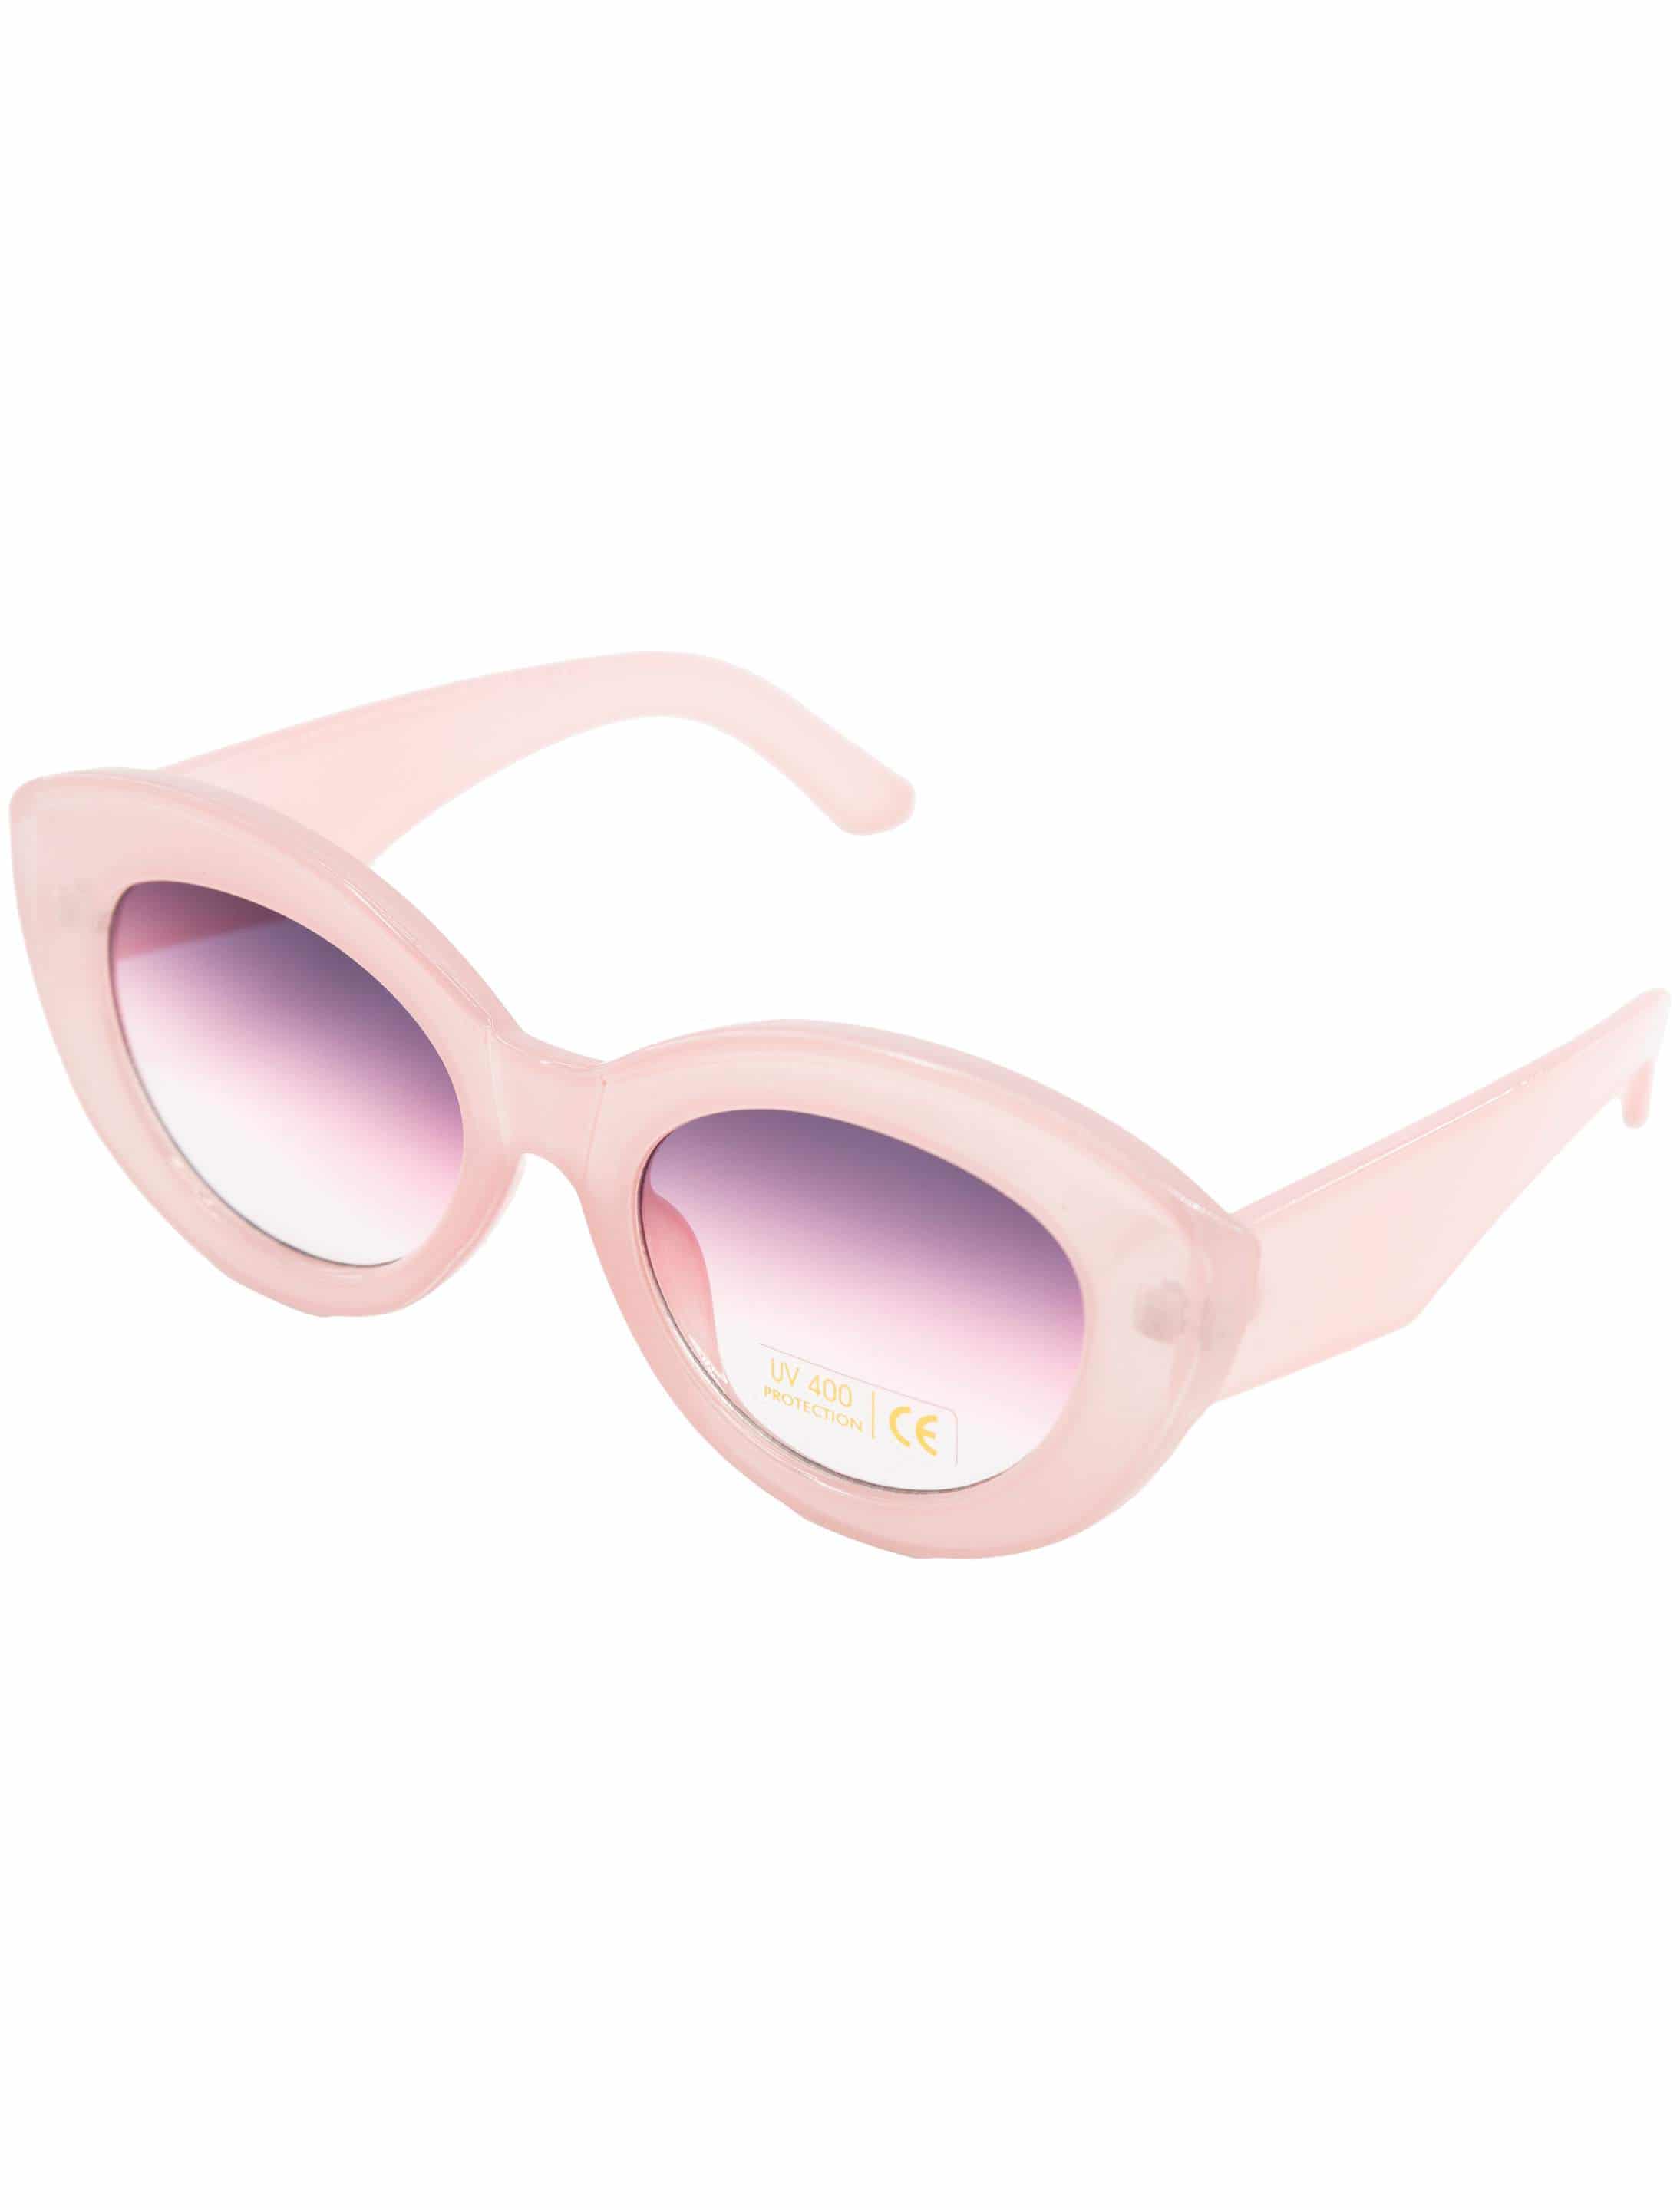 Brille Butterfly rosa